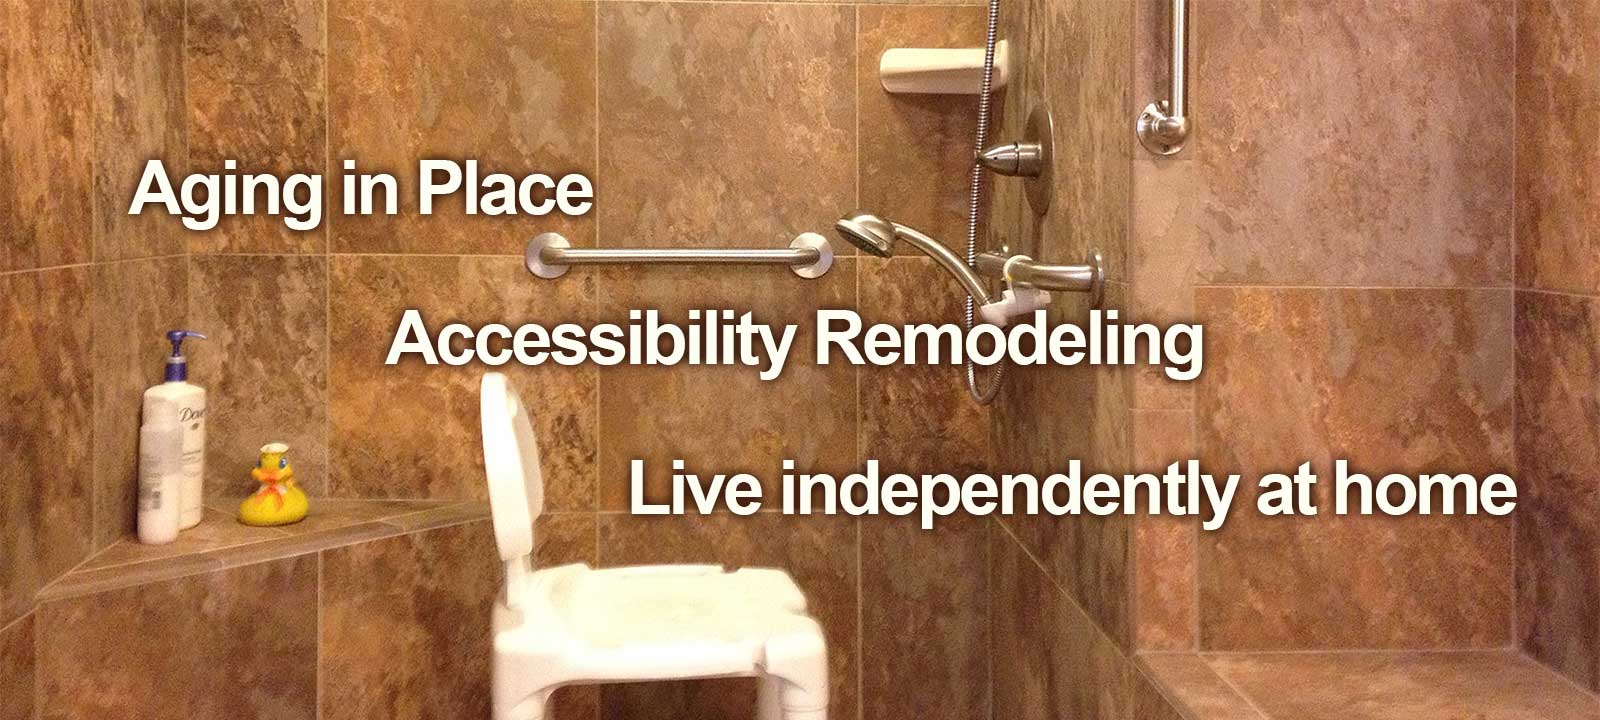 Live independently at home with aging in place accessibility remodeling